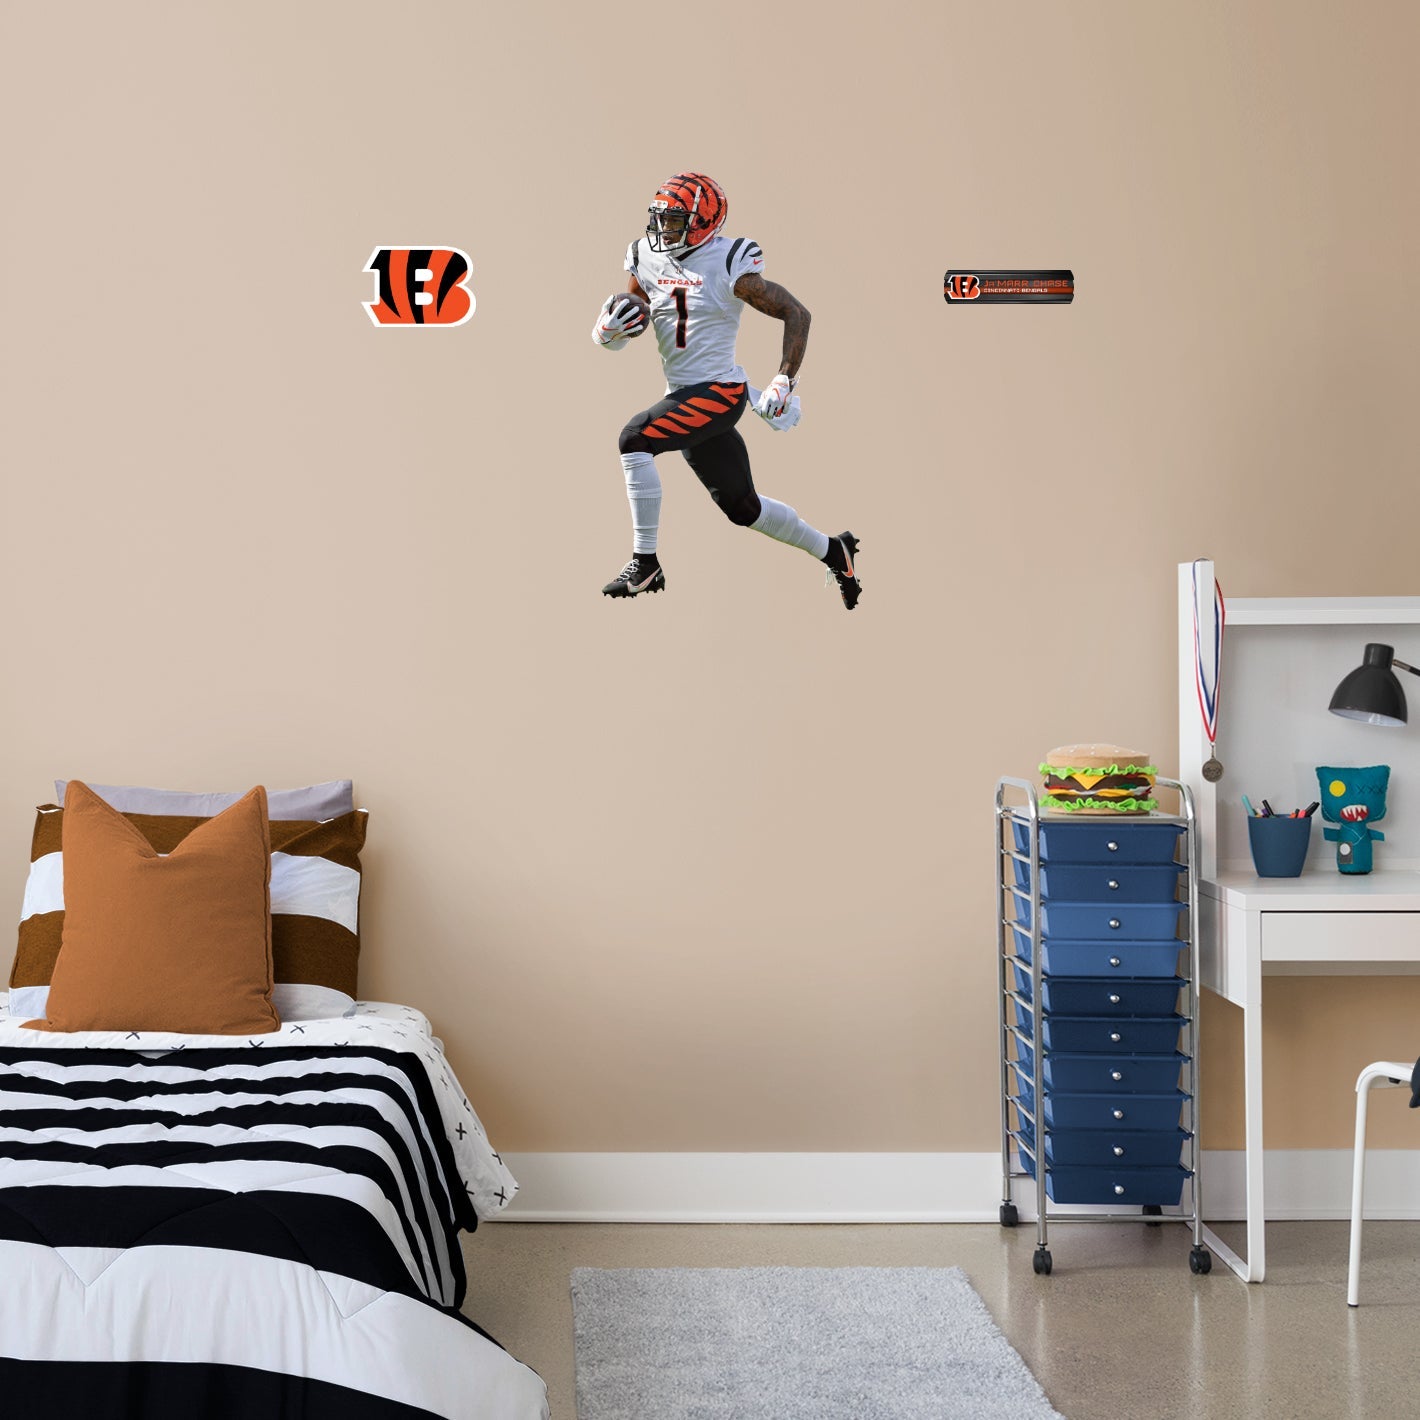 Cincinnati Bengals: Ja'Marr Chase Touchdown - Officially Licensed NFL Removable Adhesive Decal